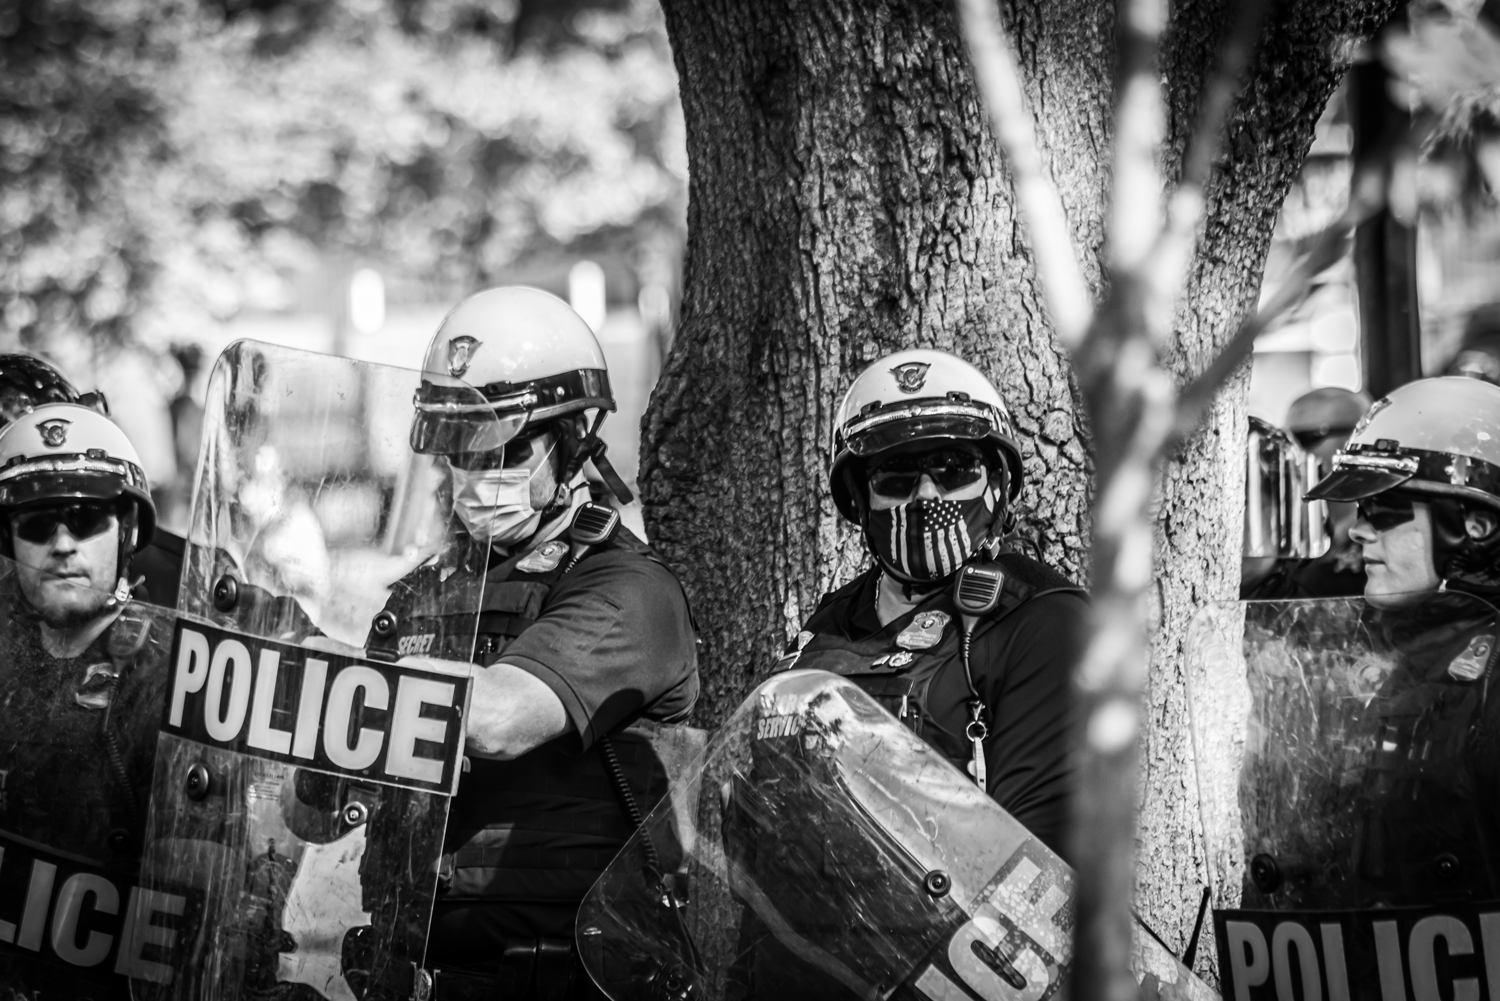 Black and white photo, both officers are wearing PPE also. One is staring straight at the camera.